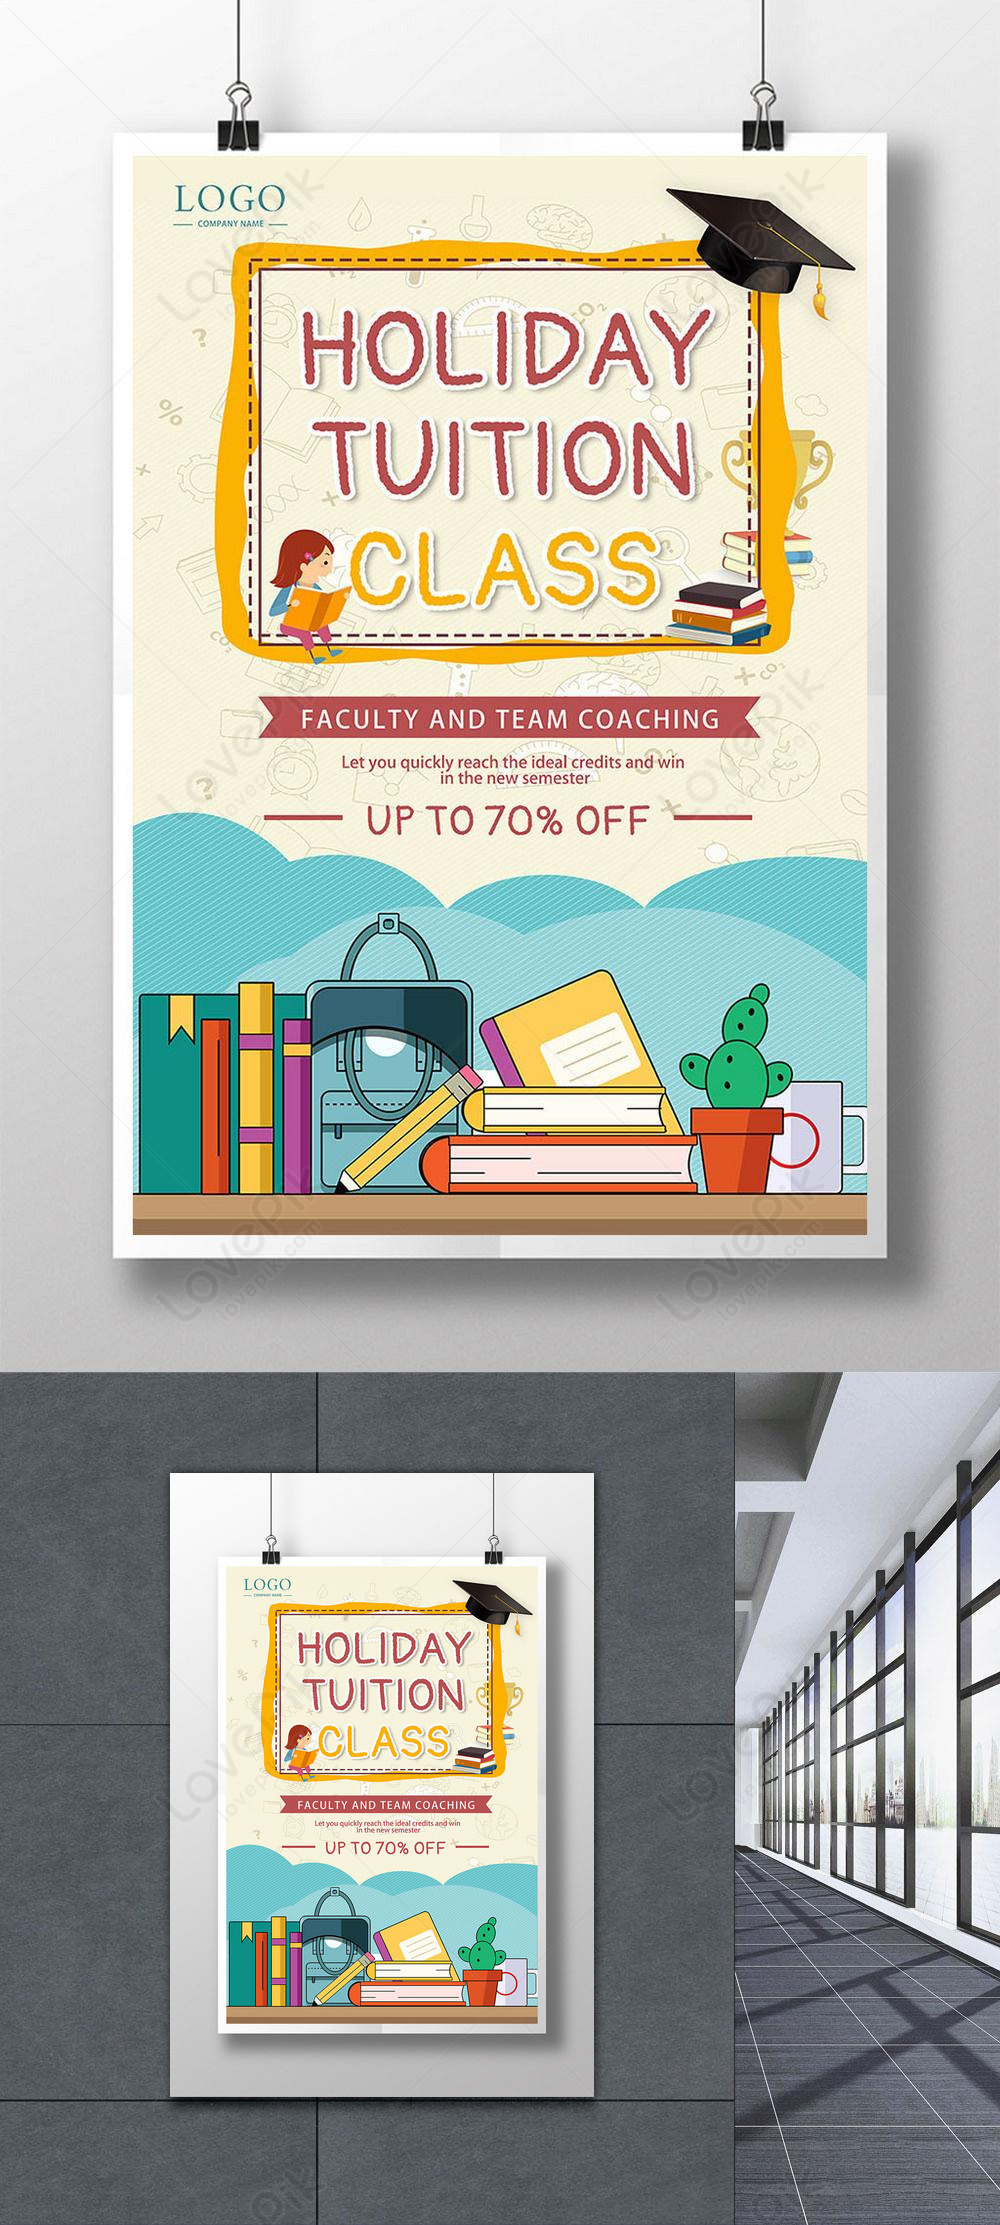 Creative cartoon holiday tuition class enrollment education post template  image_picture free download 